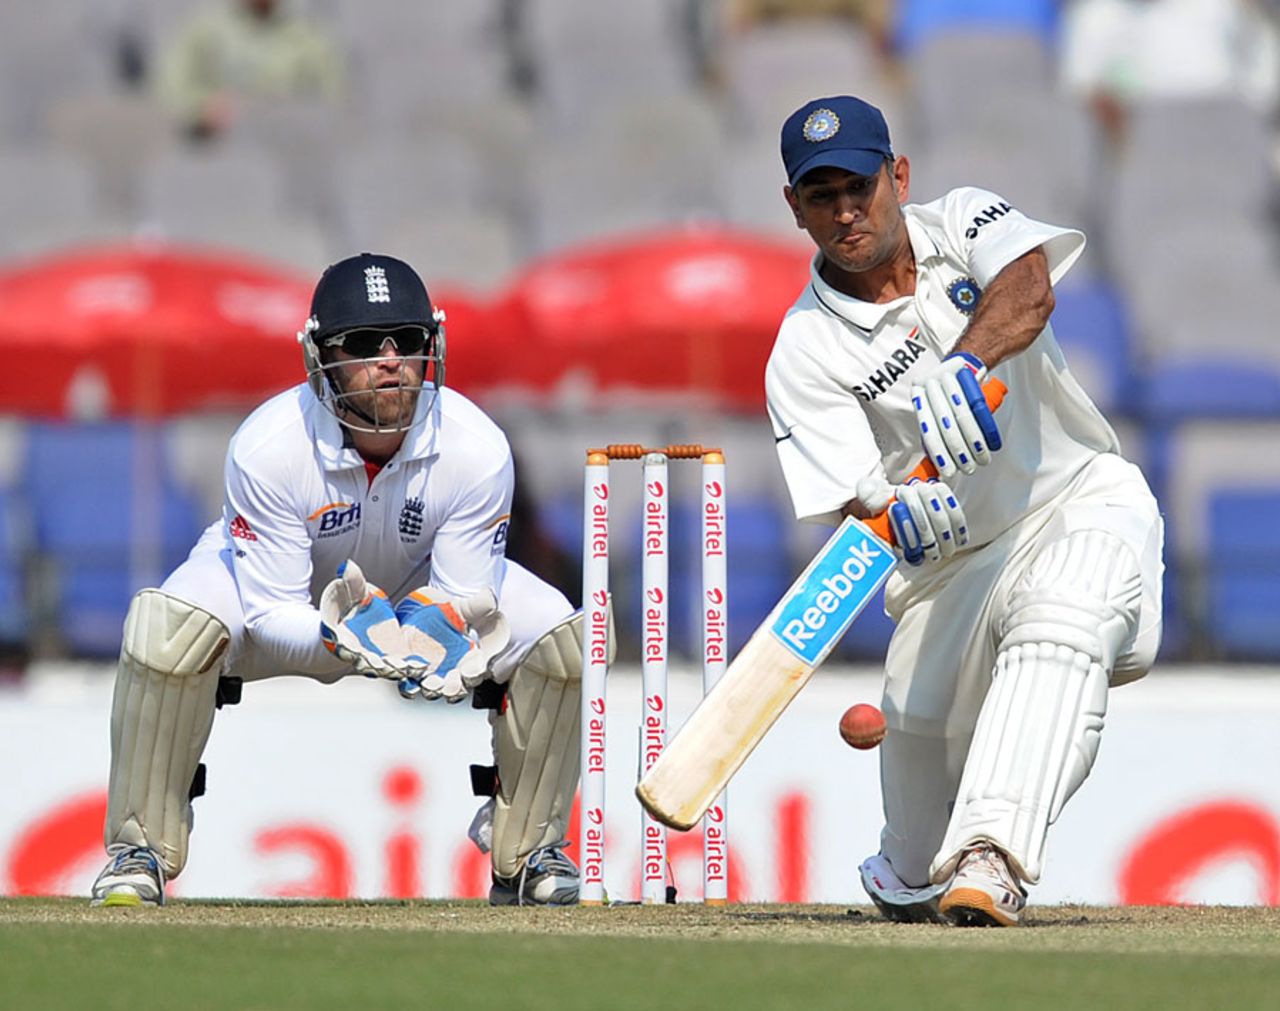 MS Dhoni plays a rare attacking shot, India v England, 4th Test, Nagpur, 3rd day, December 15, 2012